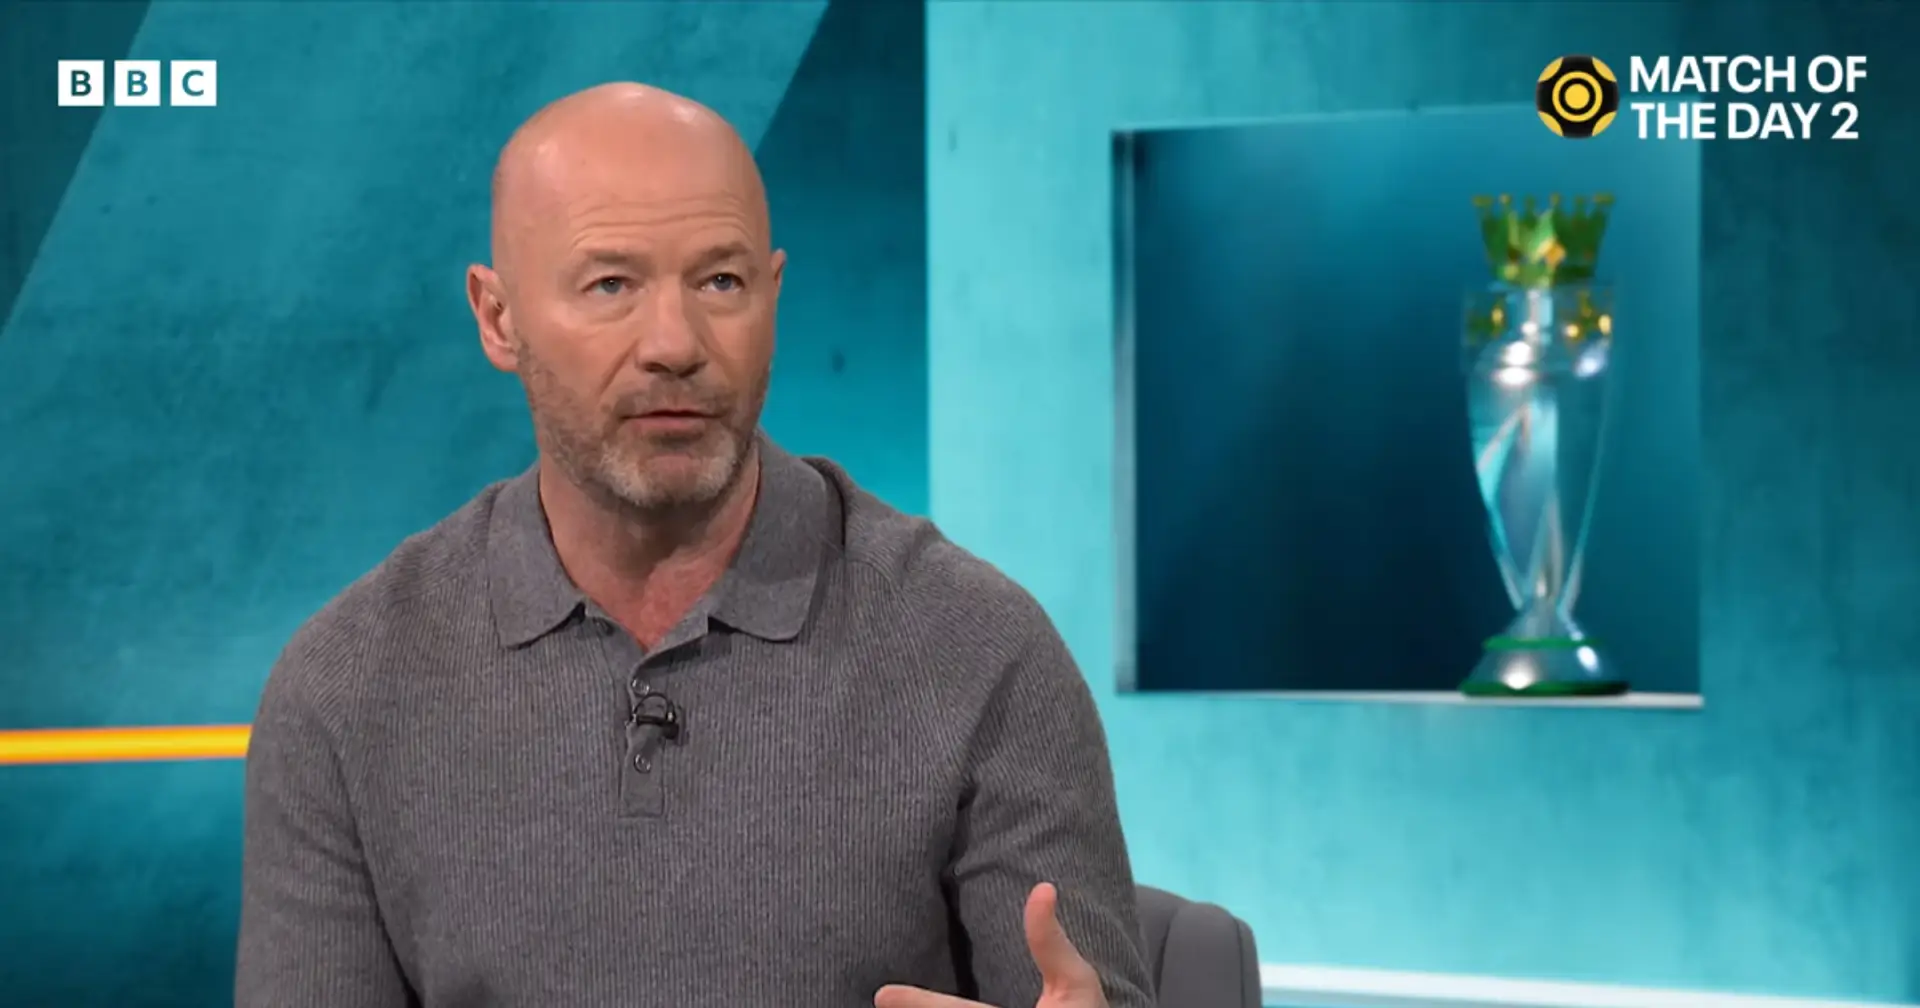 Alan Shearer names one thing that separates Arsenal and Man City in Premier League title race